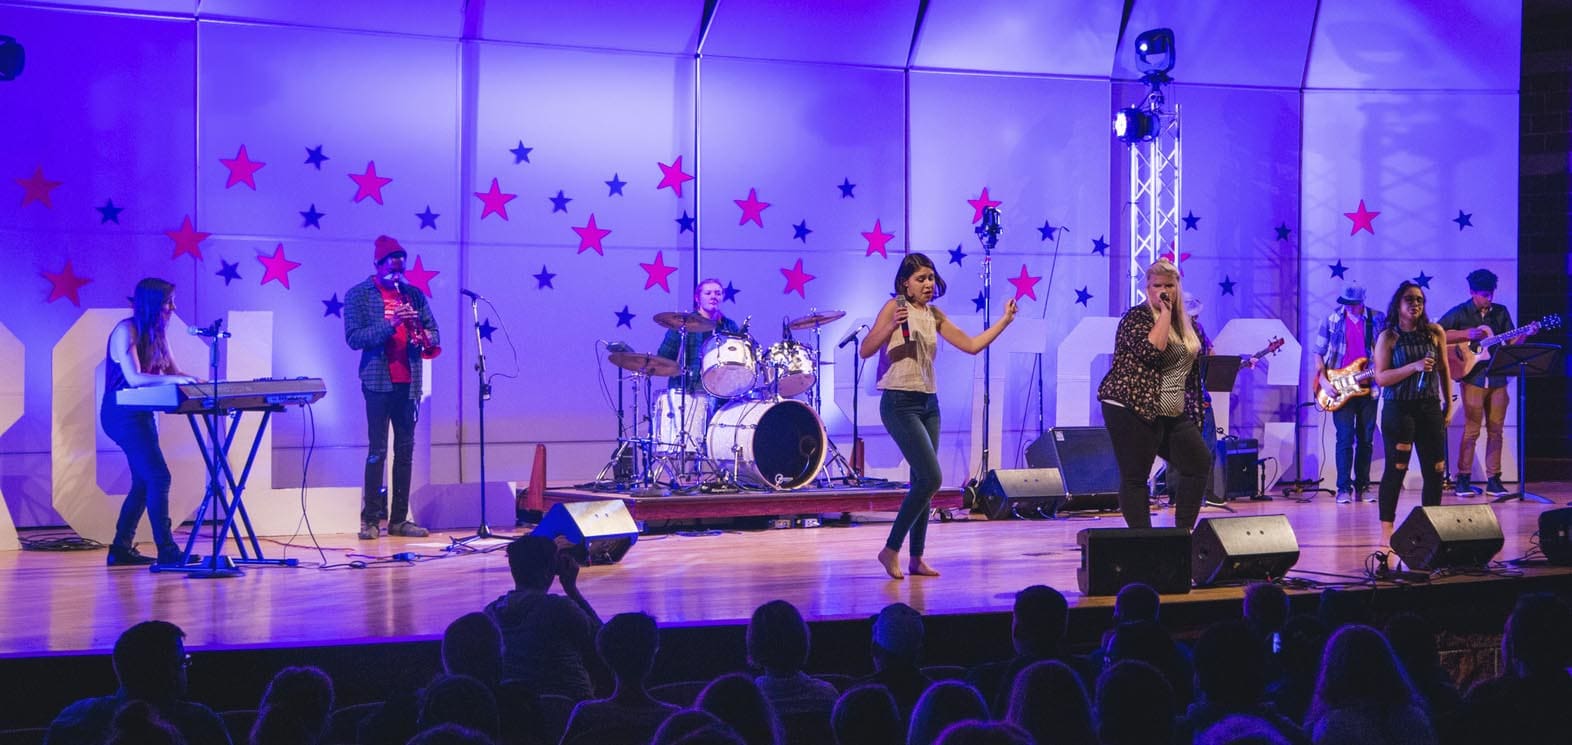 From its earliest days when it was known as Woodstock, Trinity's annual talent competition is always an unforgettable night of fun and friendly competition.